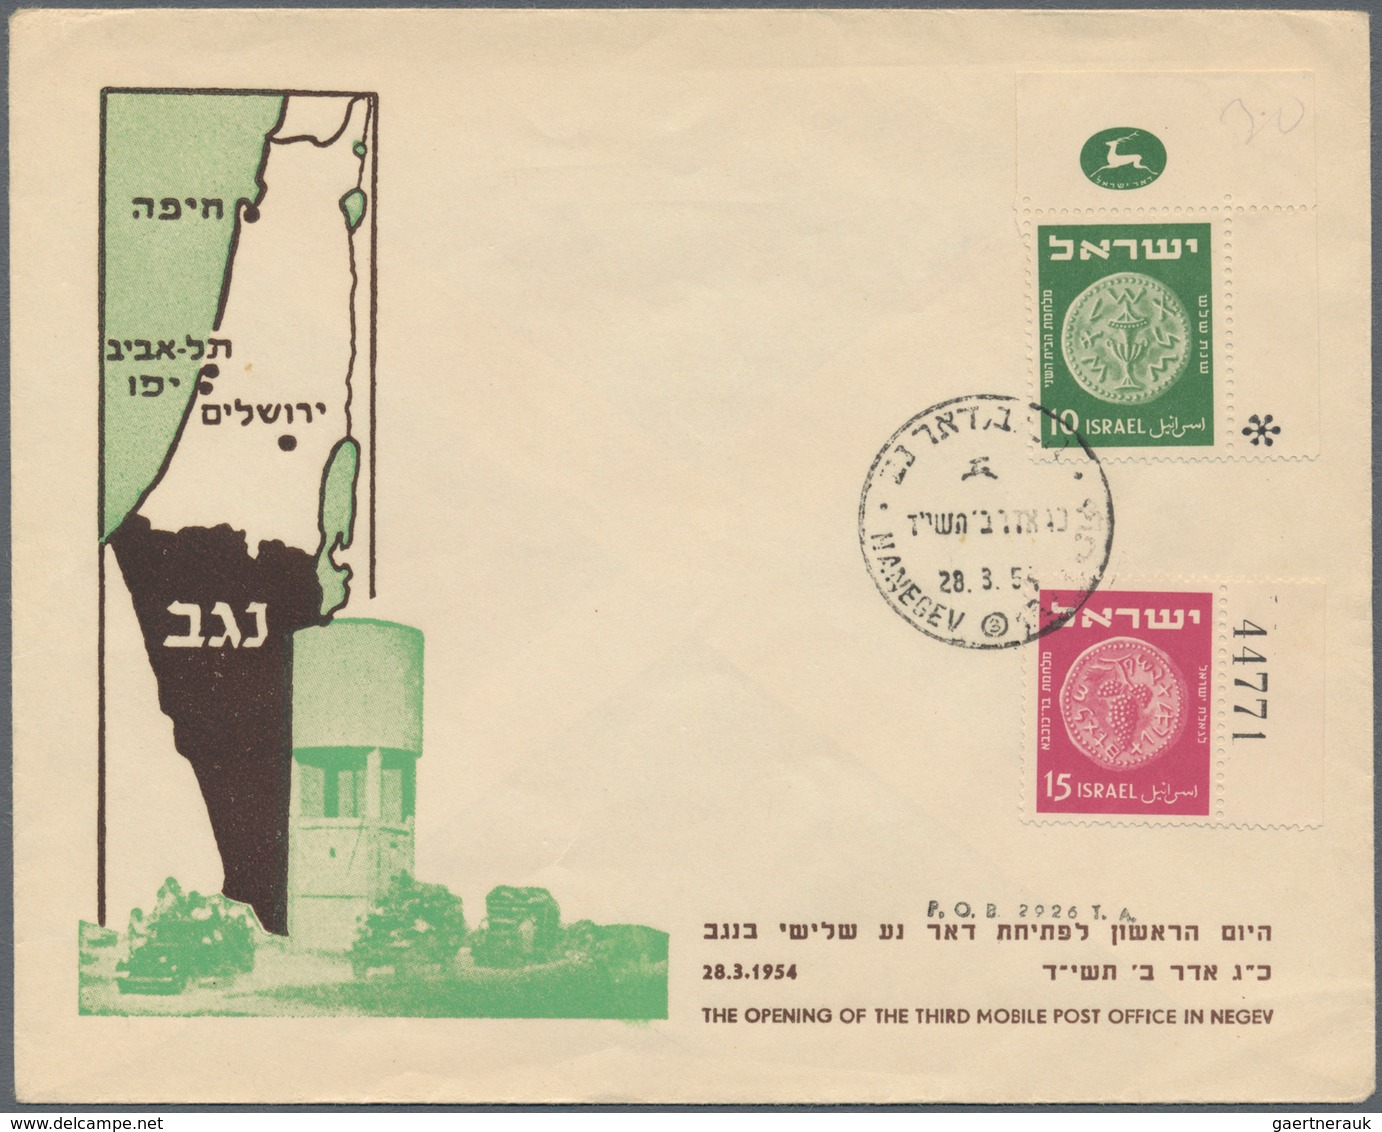 Israel: 1951/1994, MOBILE POST OFFICES, assortment of apprx. 110 covers showing a nice range of corr